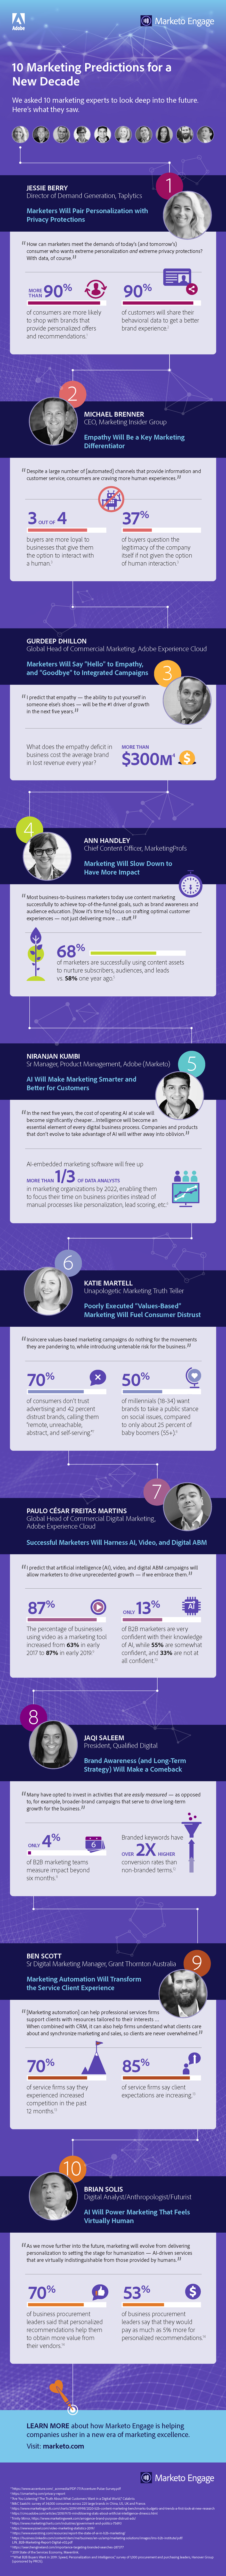 Infographic on 10 marketing predictions for upcoming decade.